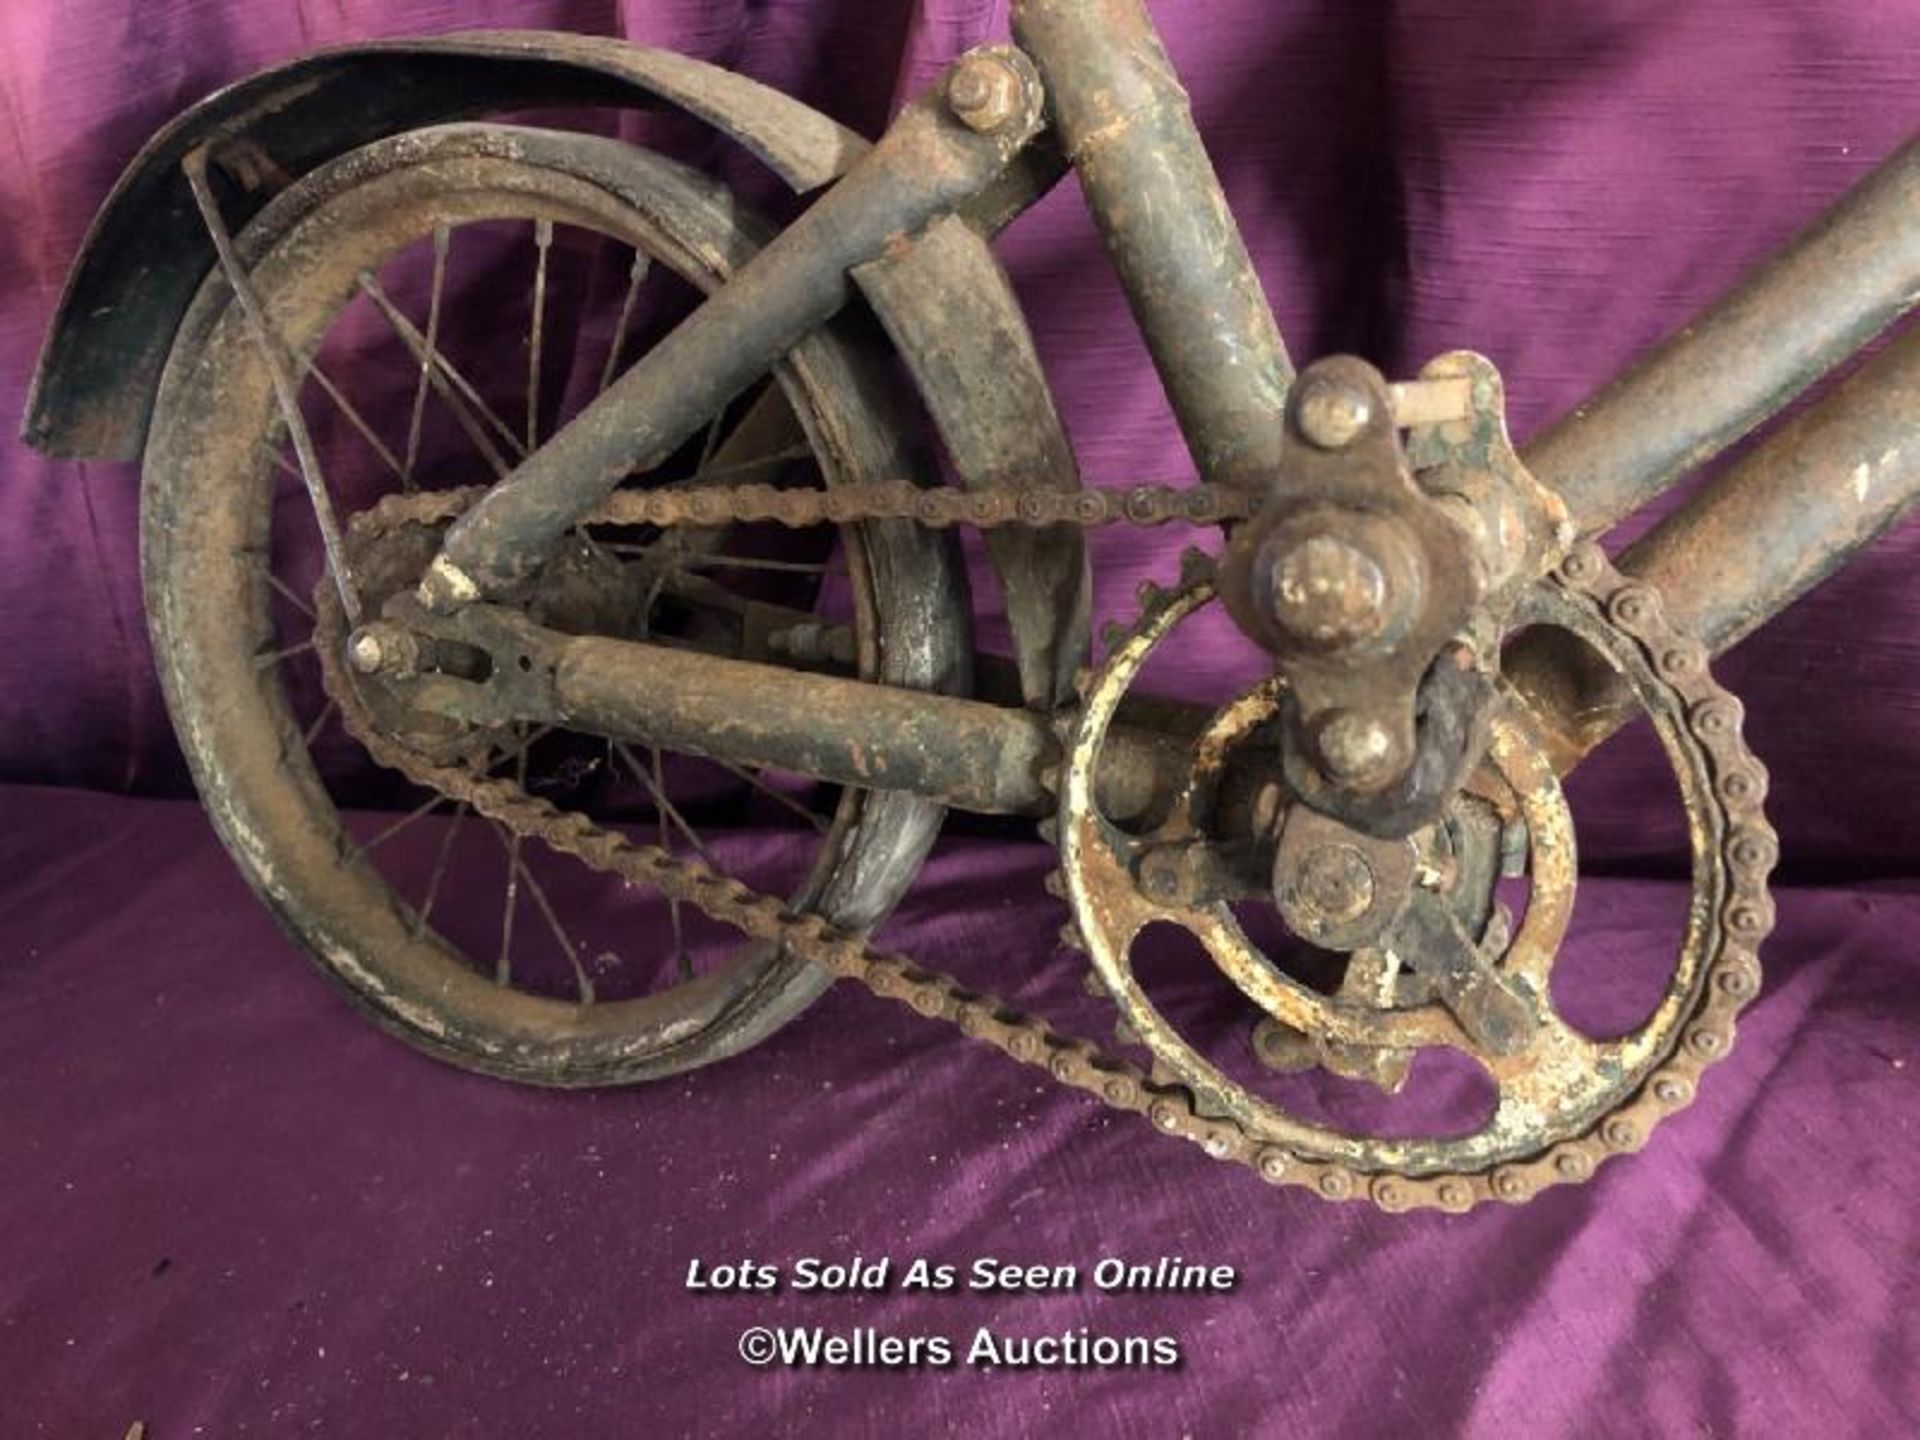 CIRCA 1900 VINTAGE CHILDS BICYCLE - Image 2 of 3